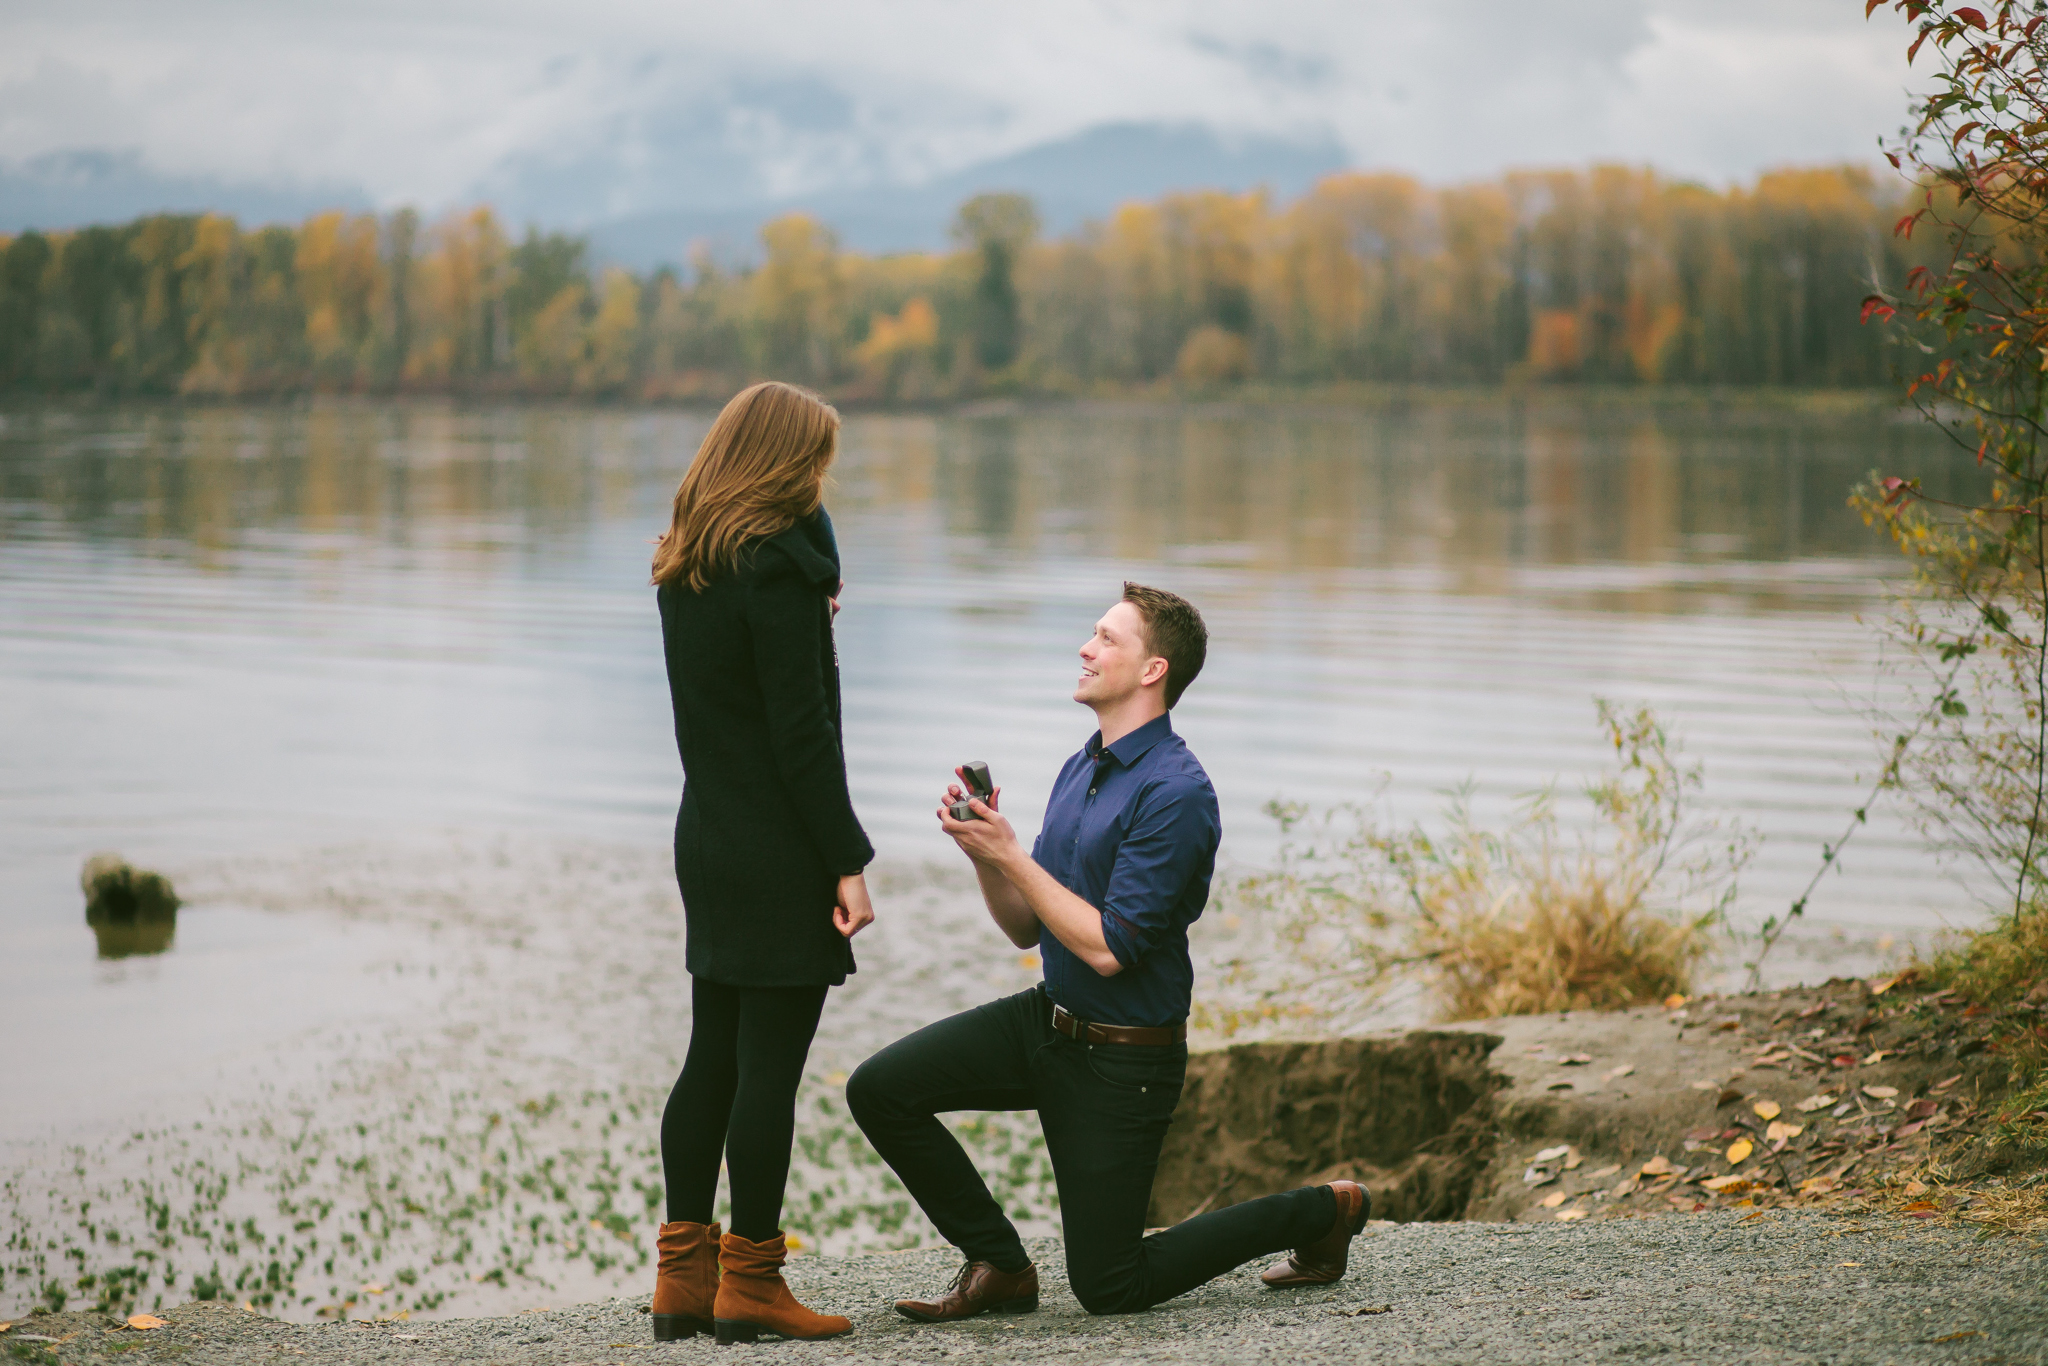 View More: http://michellekarstphotography.pass.us/jacoblindsayproposal